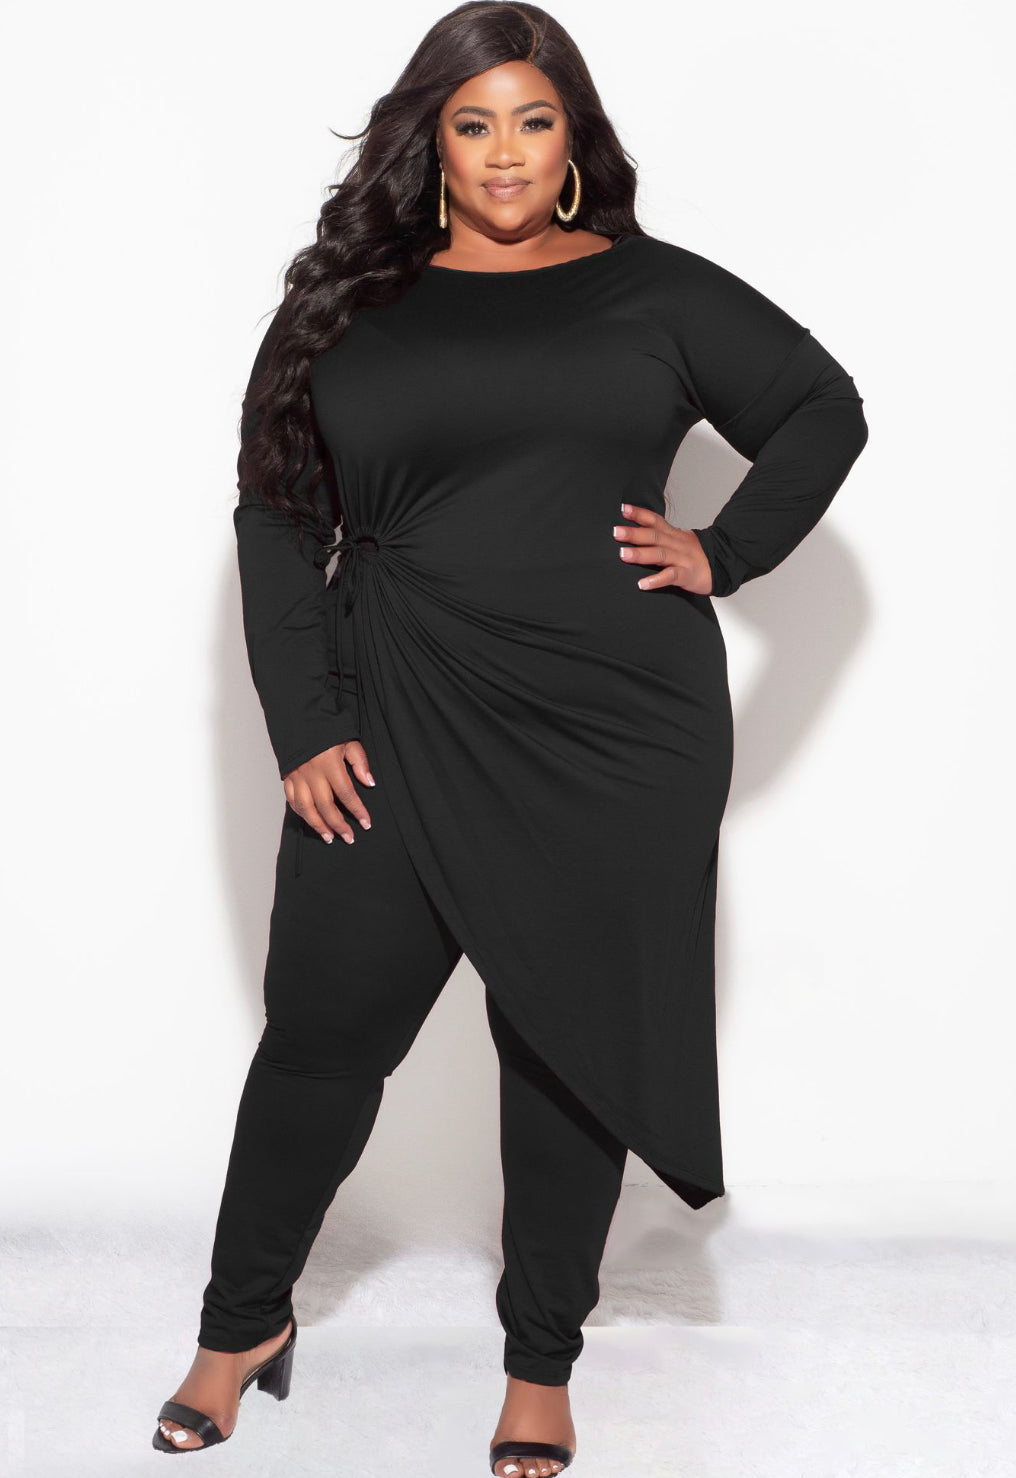 Final Sale Plus Size 2pc High-Low Top and Pants in Black